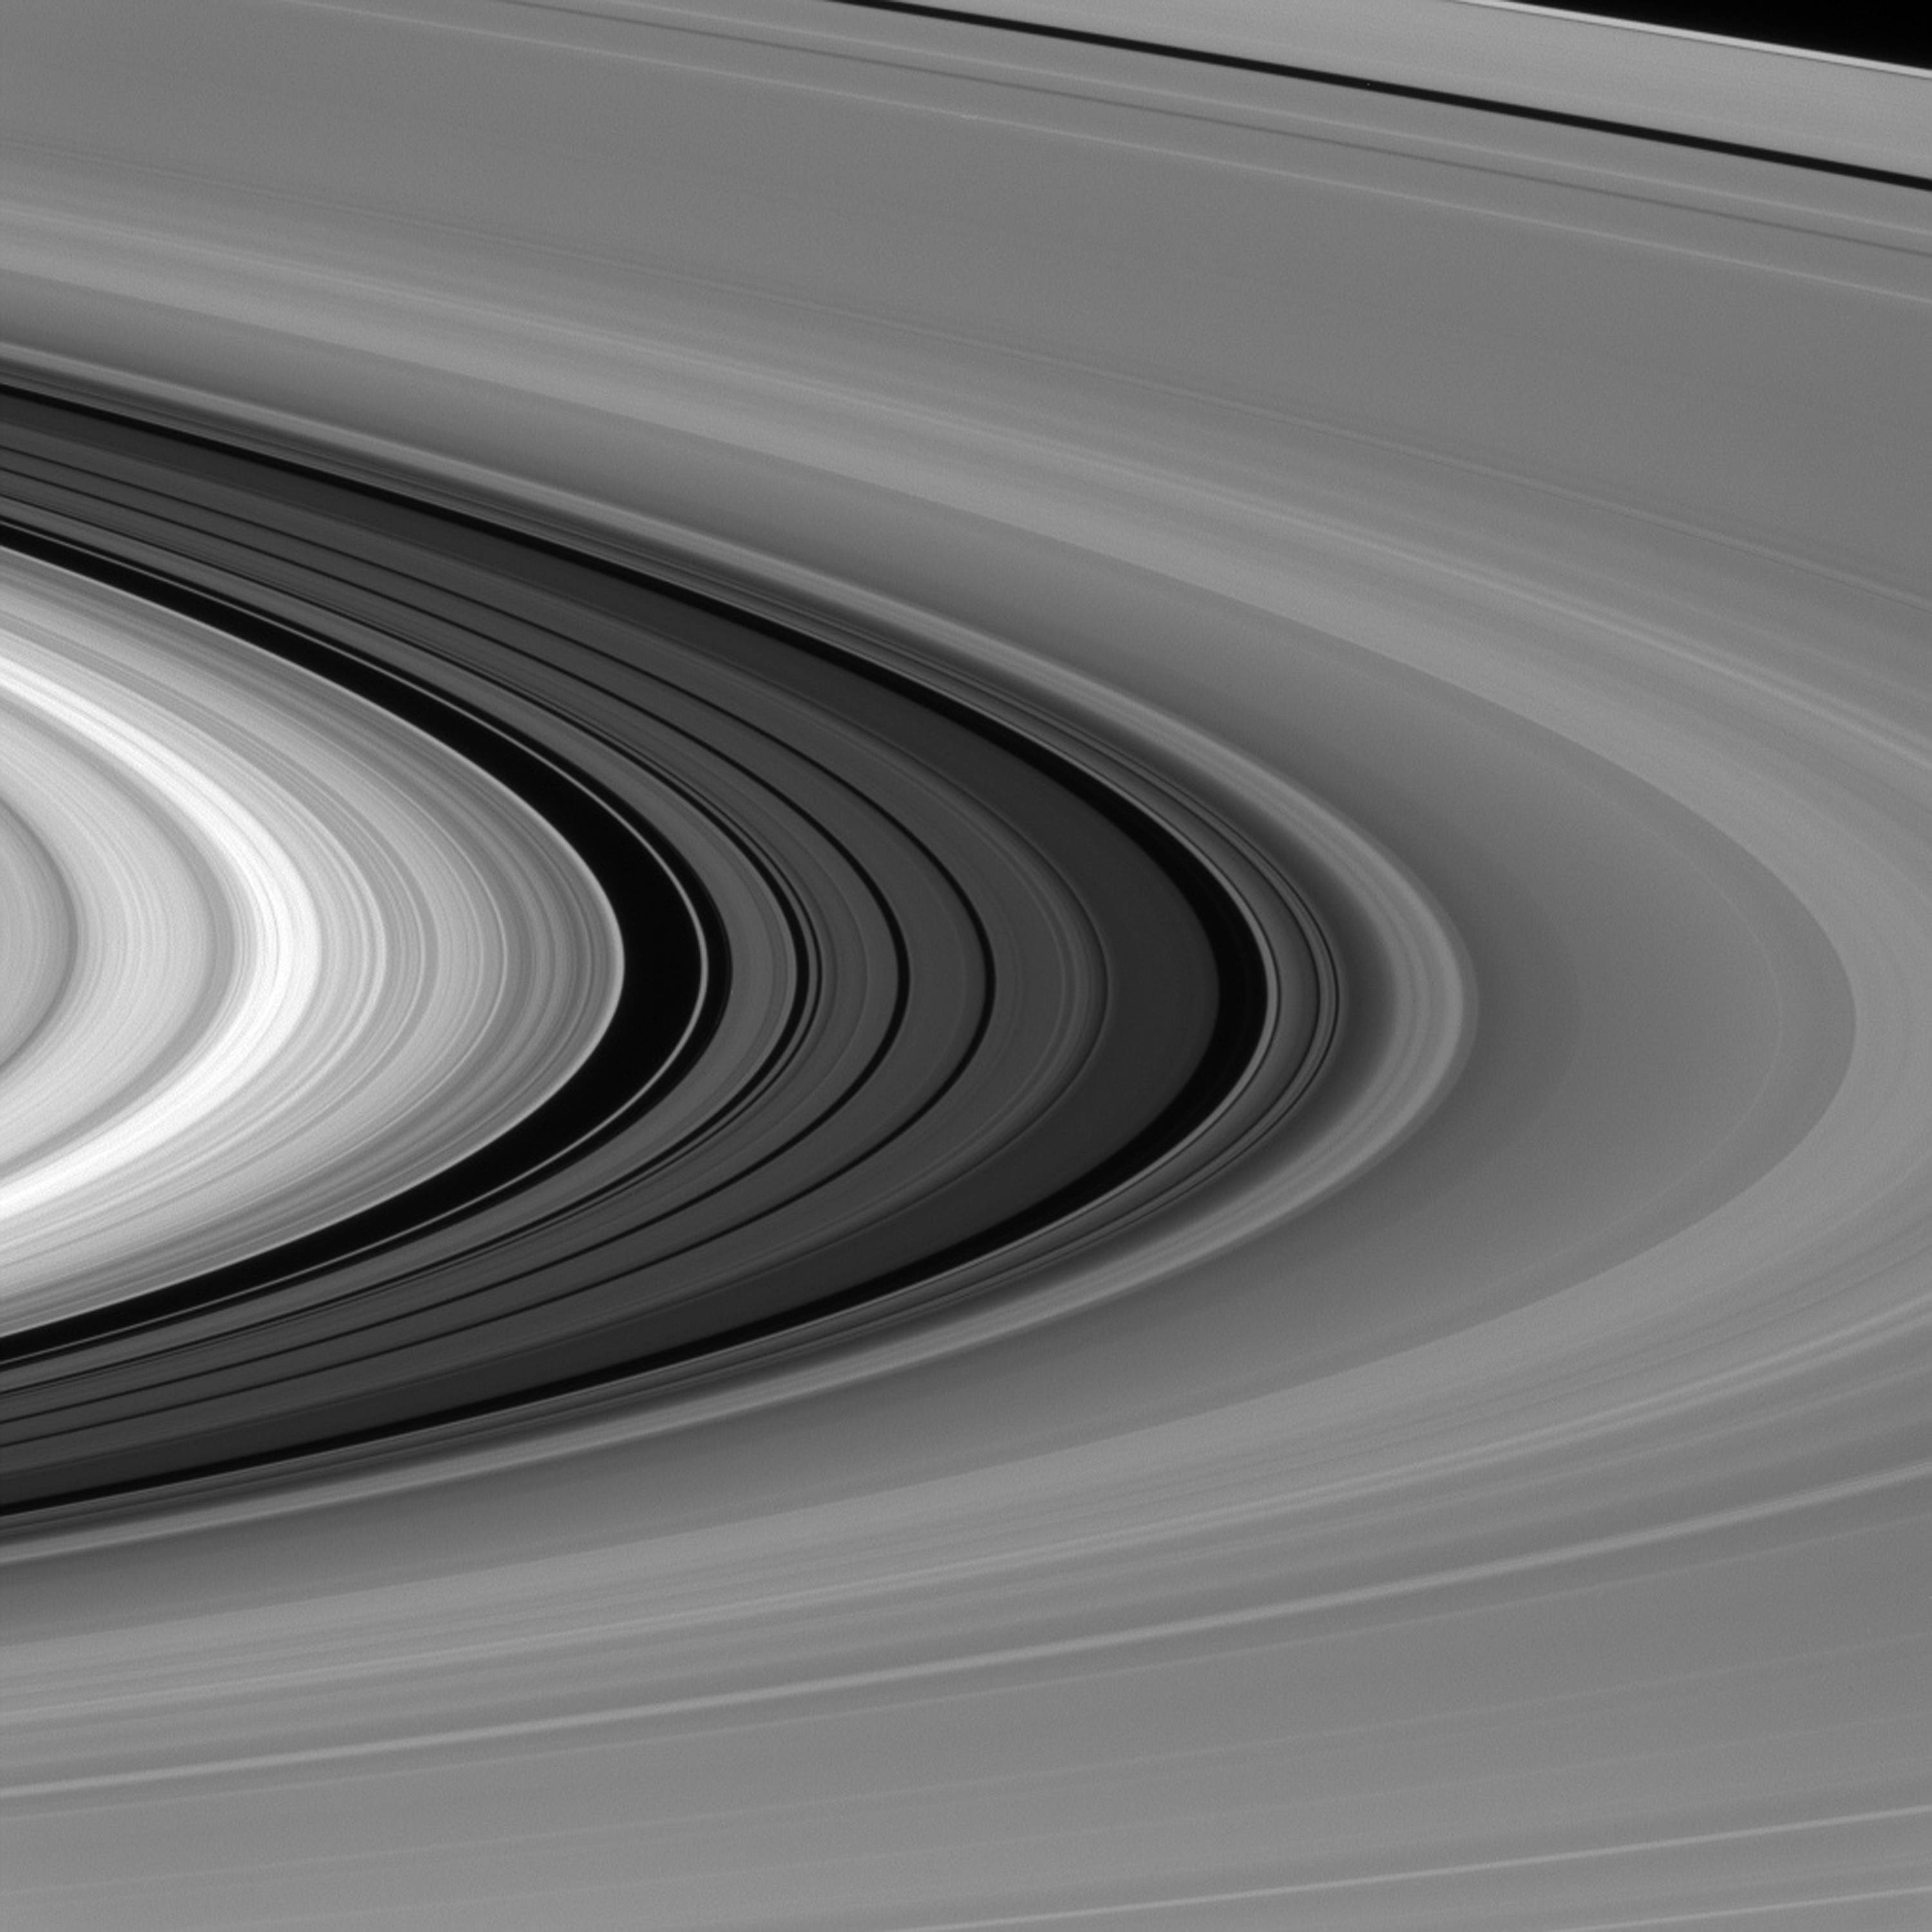 IN SPACE - JANUARY 28: In this handout image provided by the National Aeronautics and Space Administration (NASA), this view looks toward the sunlit side of the rings and was taken in visible light with the Cassini spacecraft narrow-angle camera on Jan. 28, 2016. The 2,980-mile-wide division in Saturn's rings (seen between the bright B ring and dimmer A ring) was acquired at a distance of approximately 740,000 miles (1.2 million kilometers) from Saturn. Between April and September 2017, Cassini will plunge repeatedly through the gap that separates the planet from the rings. The Cassini mission is a cooperative project of NASA, ESA (the European Space Agency) and the Italian Space Agency. (Photo by NASA/JPL-Caltech/Space Science Institute via Getty Images)